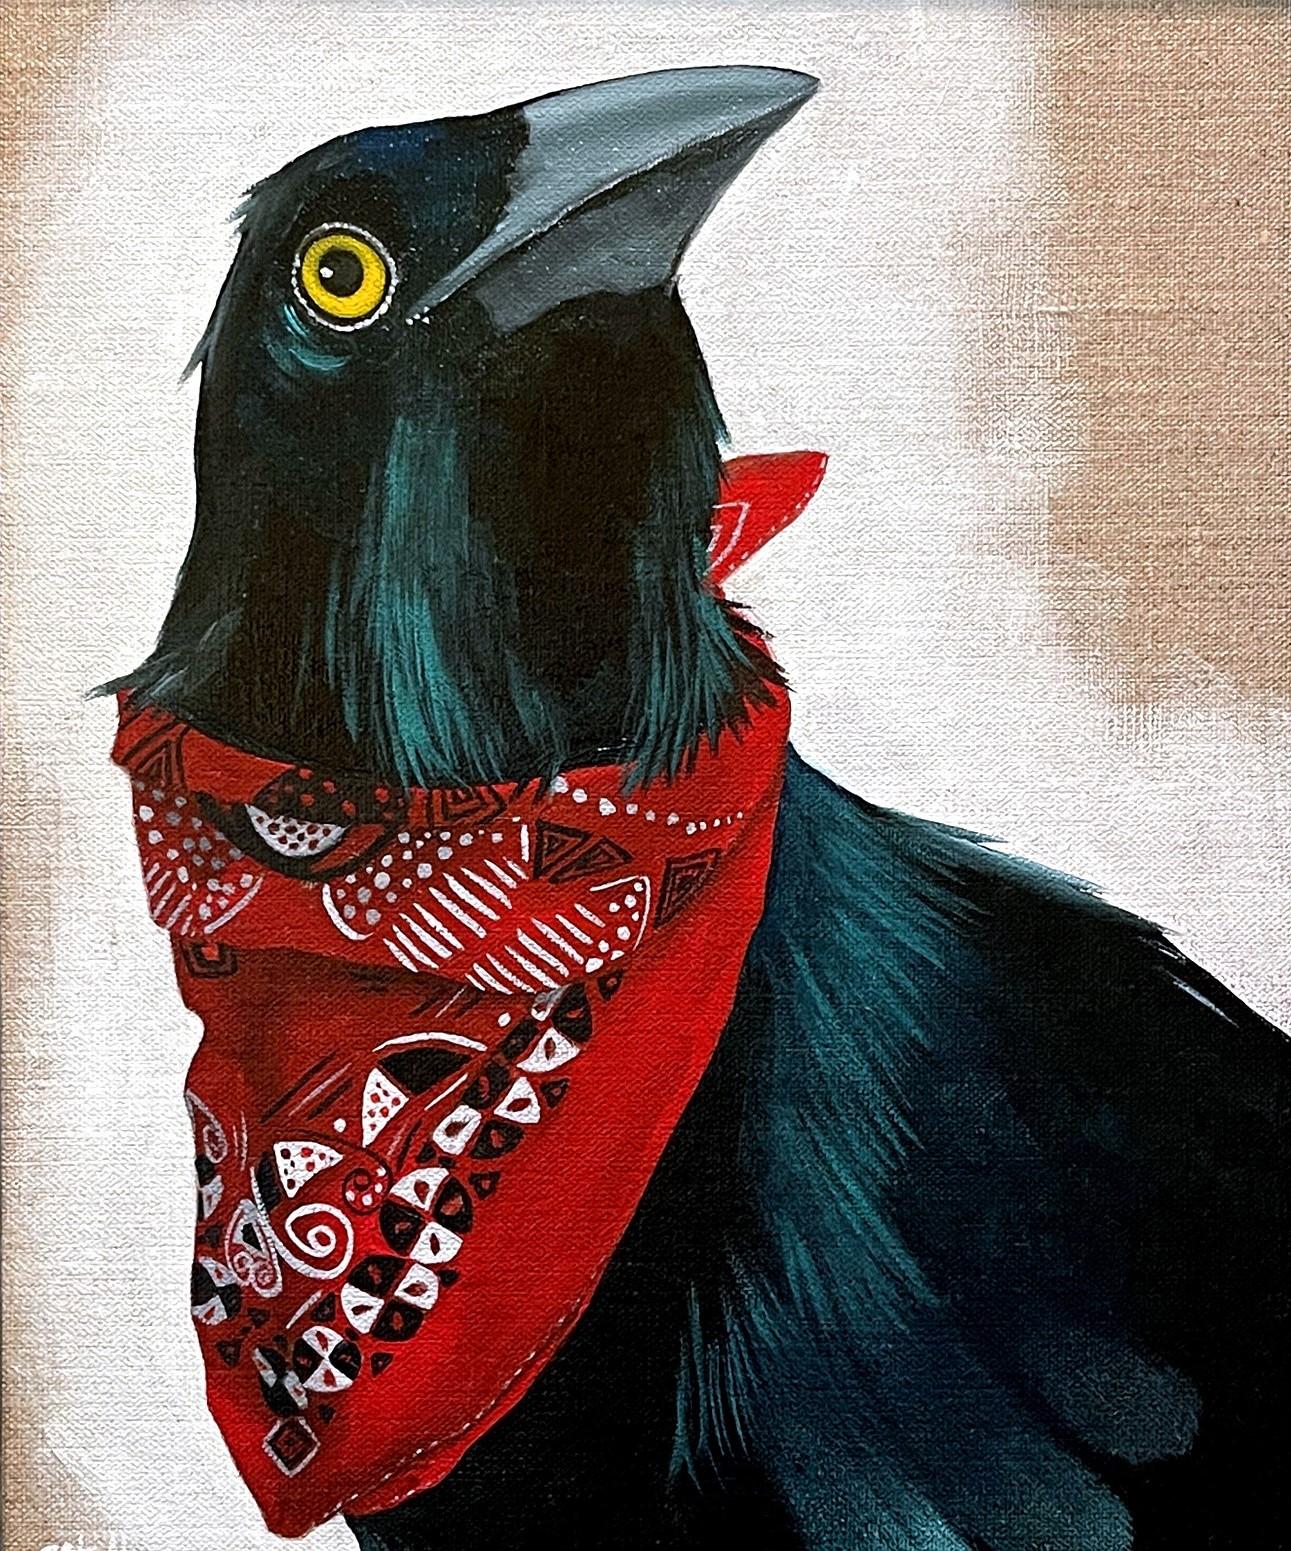 Christy Stallop's "Sidekick" (2022) is an original oil painting on linen, measuring 14 x 11 inches. This striking portrait features a grackle adorned with a vibrant red bandana, set against a minimalistic background. Stallop's meticulous brushwork